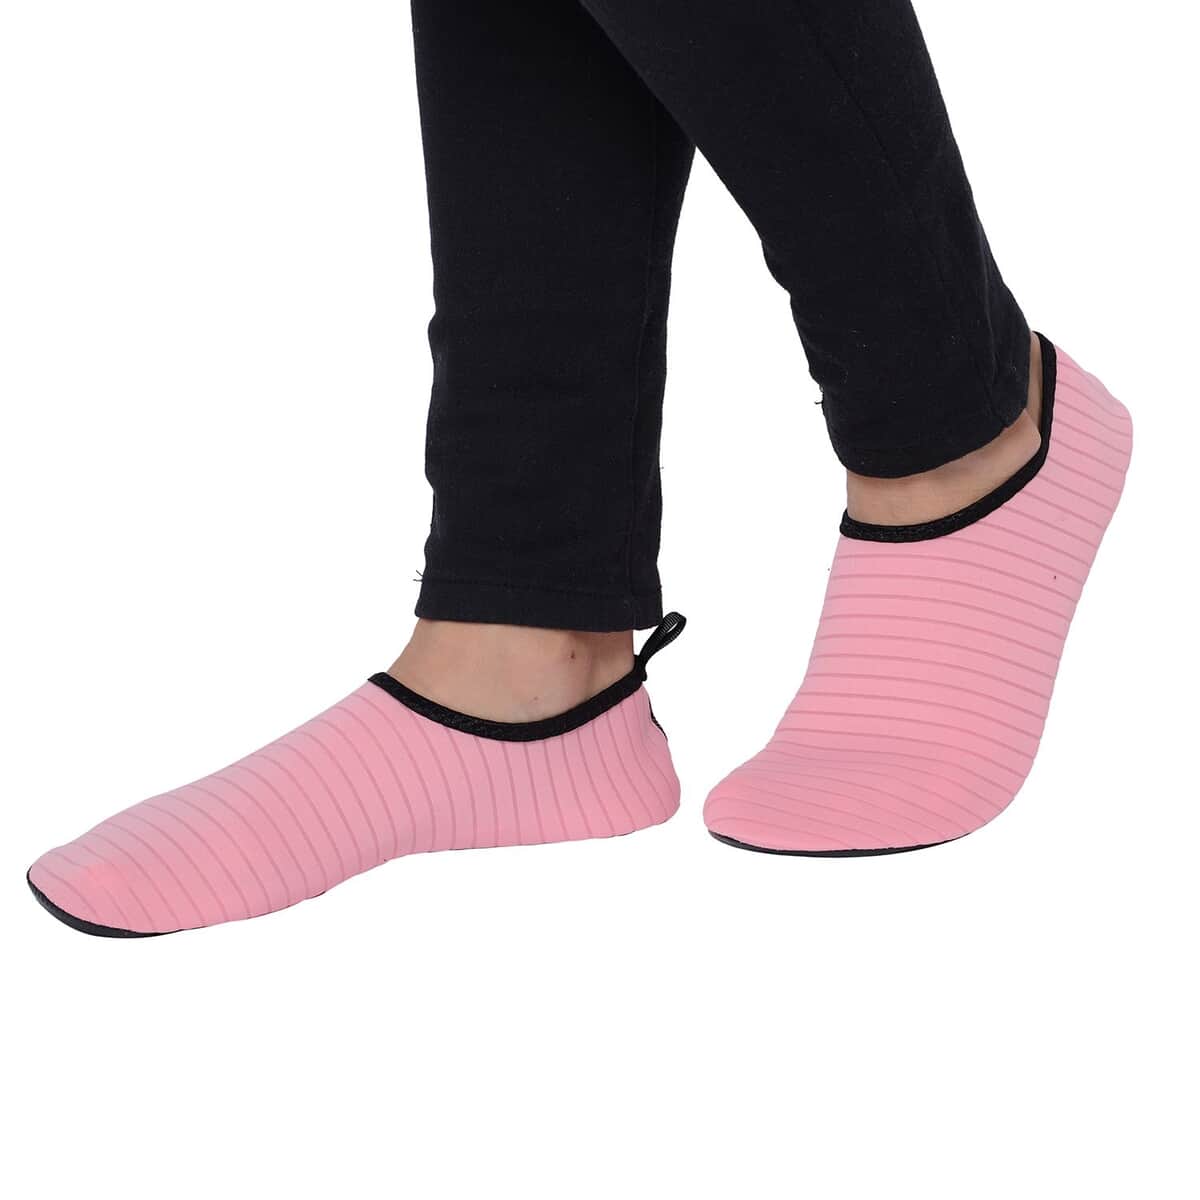 Pink Women's and Men's Water Shoes Barefoot Quick-Dry Aqua Socks image number 2